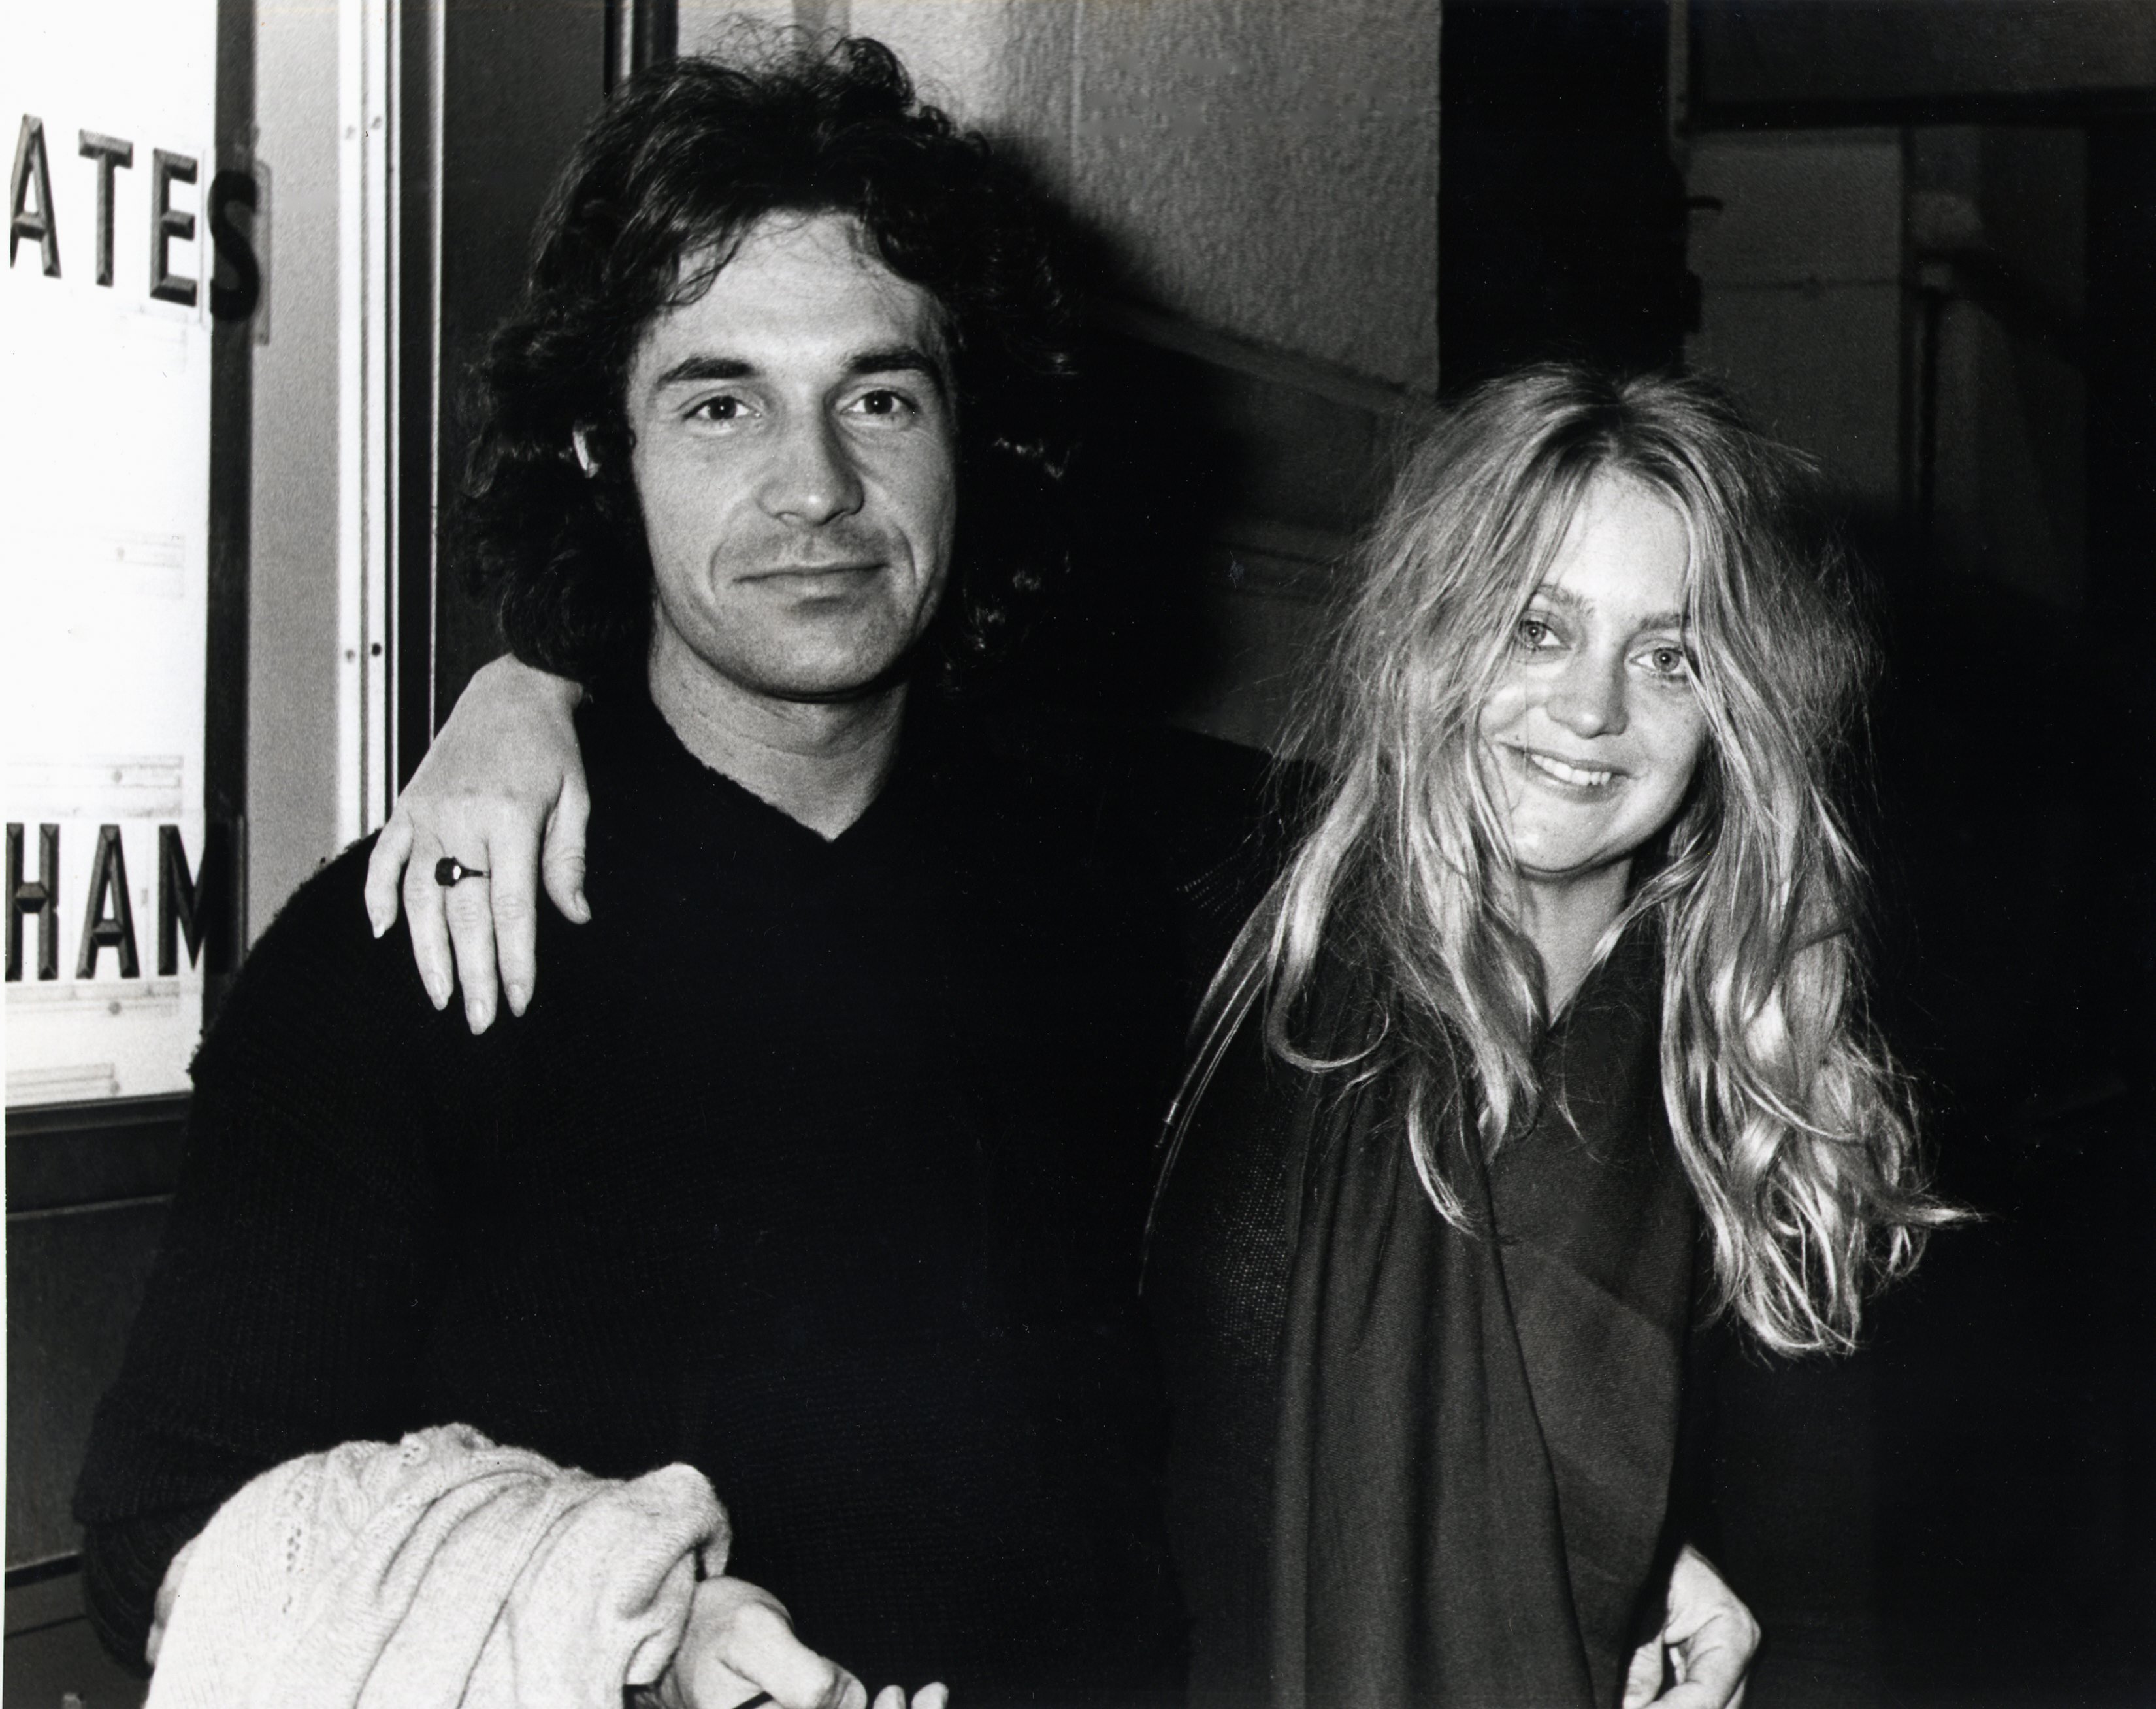 Pictured: Musician Bill Hudson and his wife actress Goldie Hawn on November 20 | Photo: Getty Images